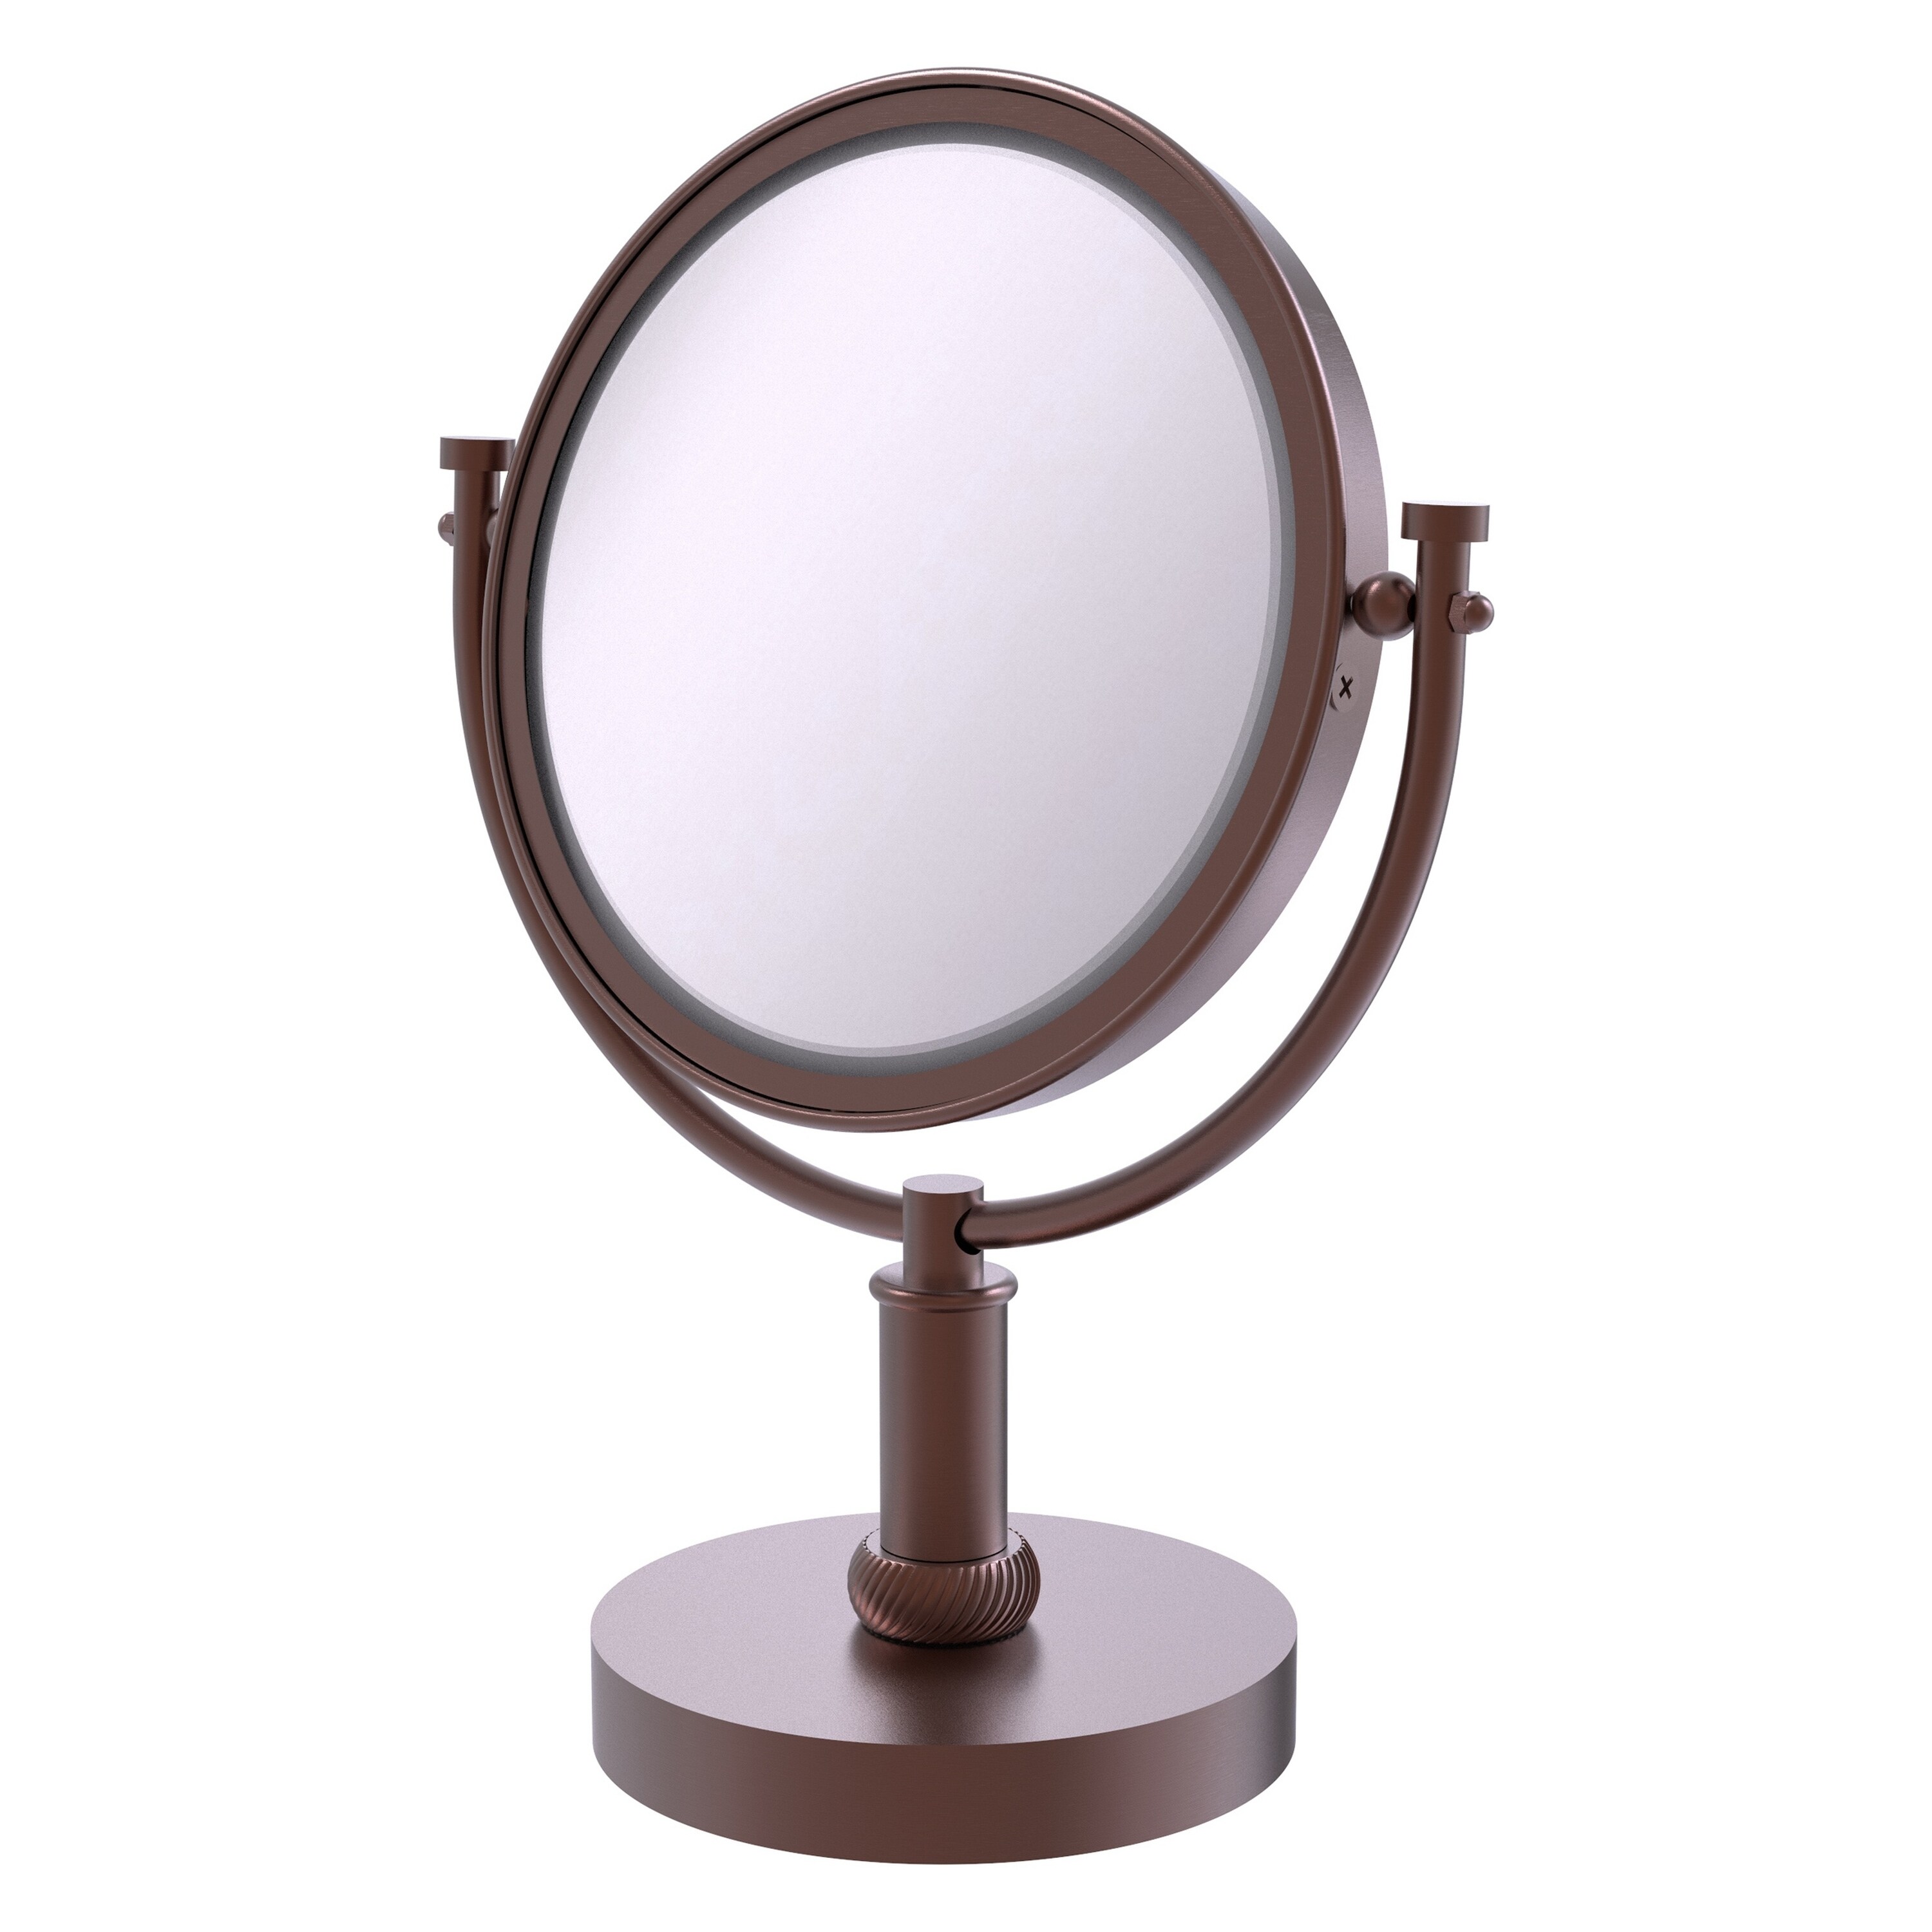 8-in x 15-in Antique Copper Double-sided 5X Magnifying Countertop Vanity Mirror | - Allied Brass DM-4T/4X-CA